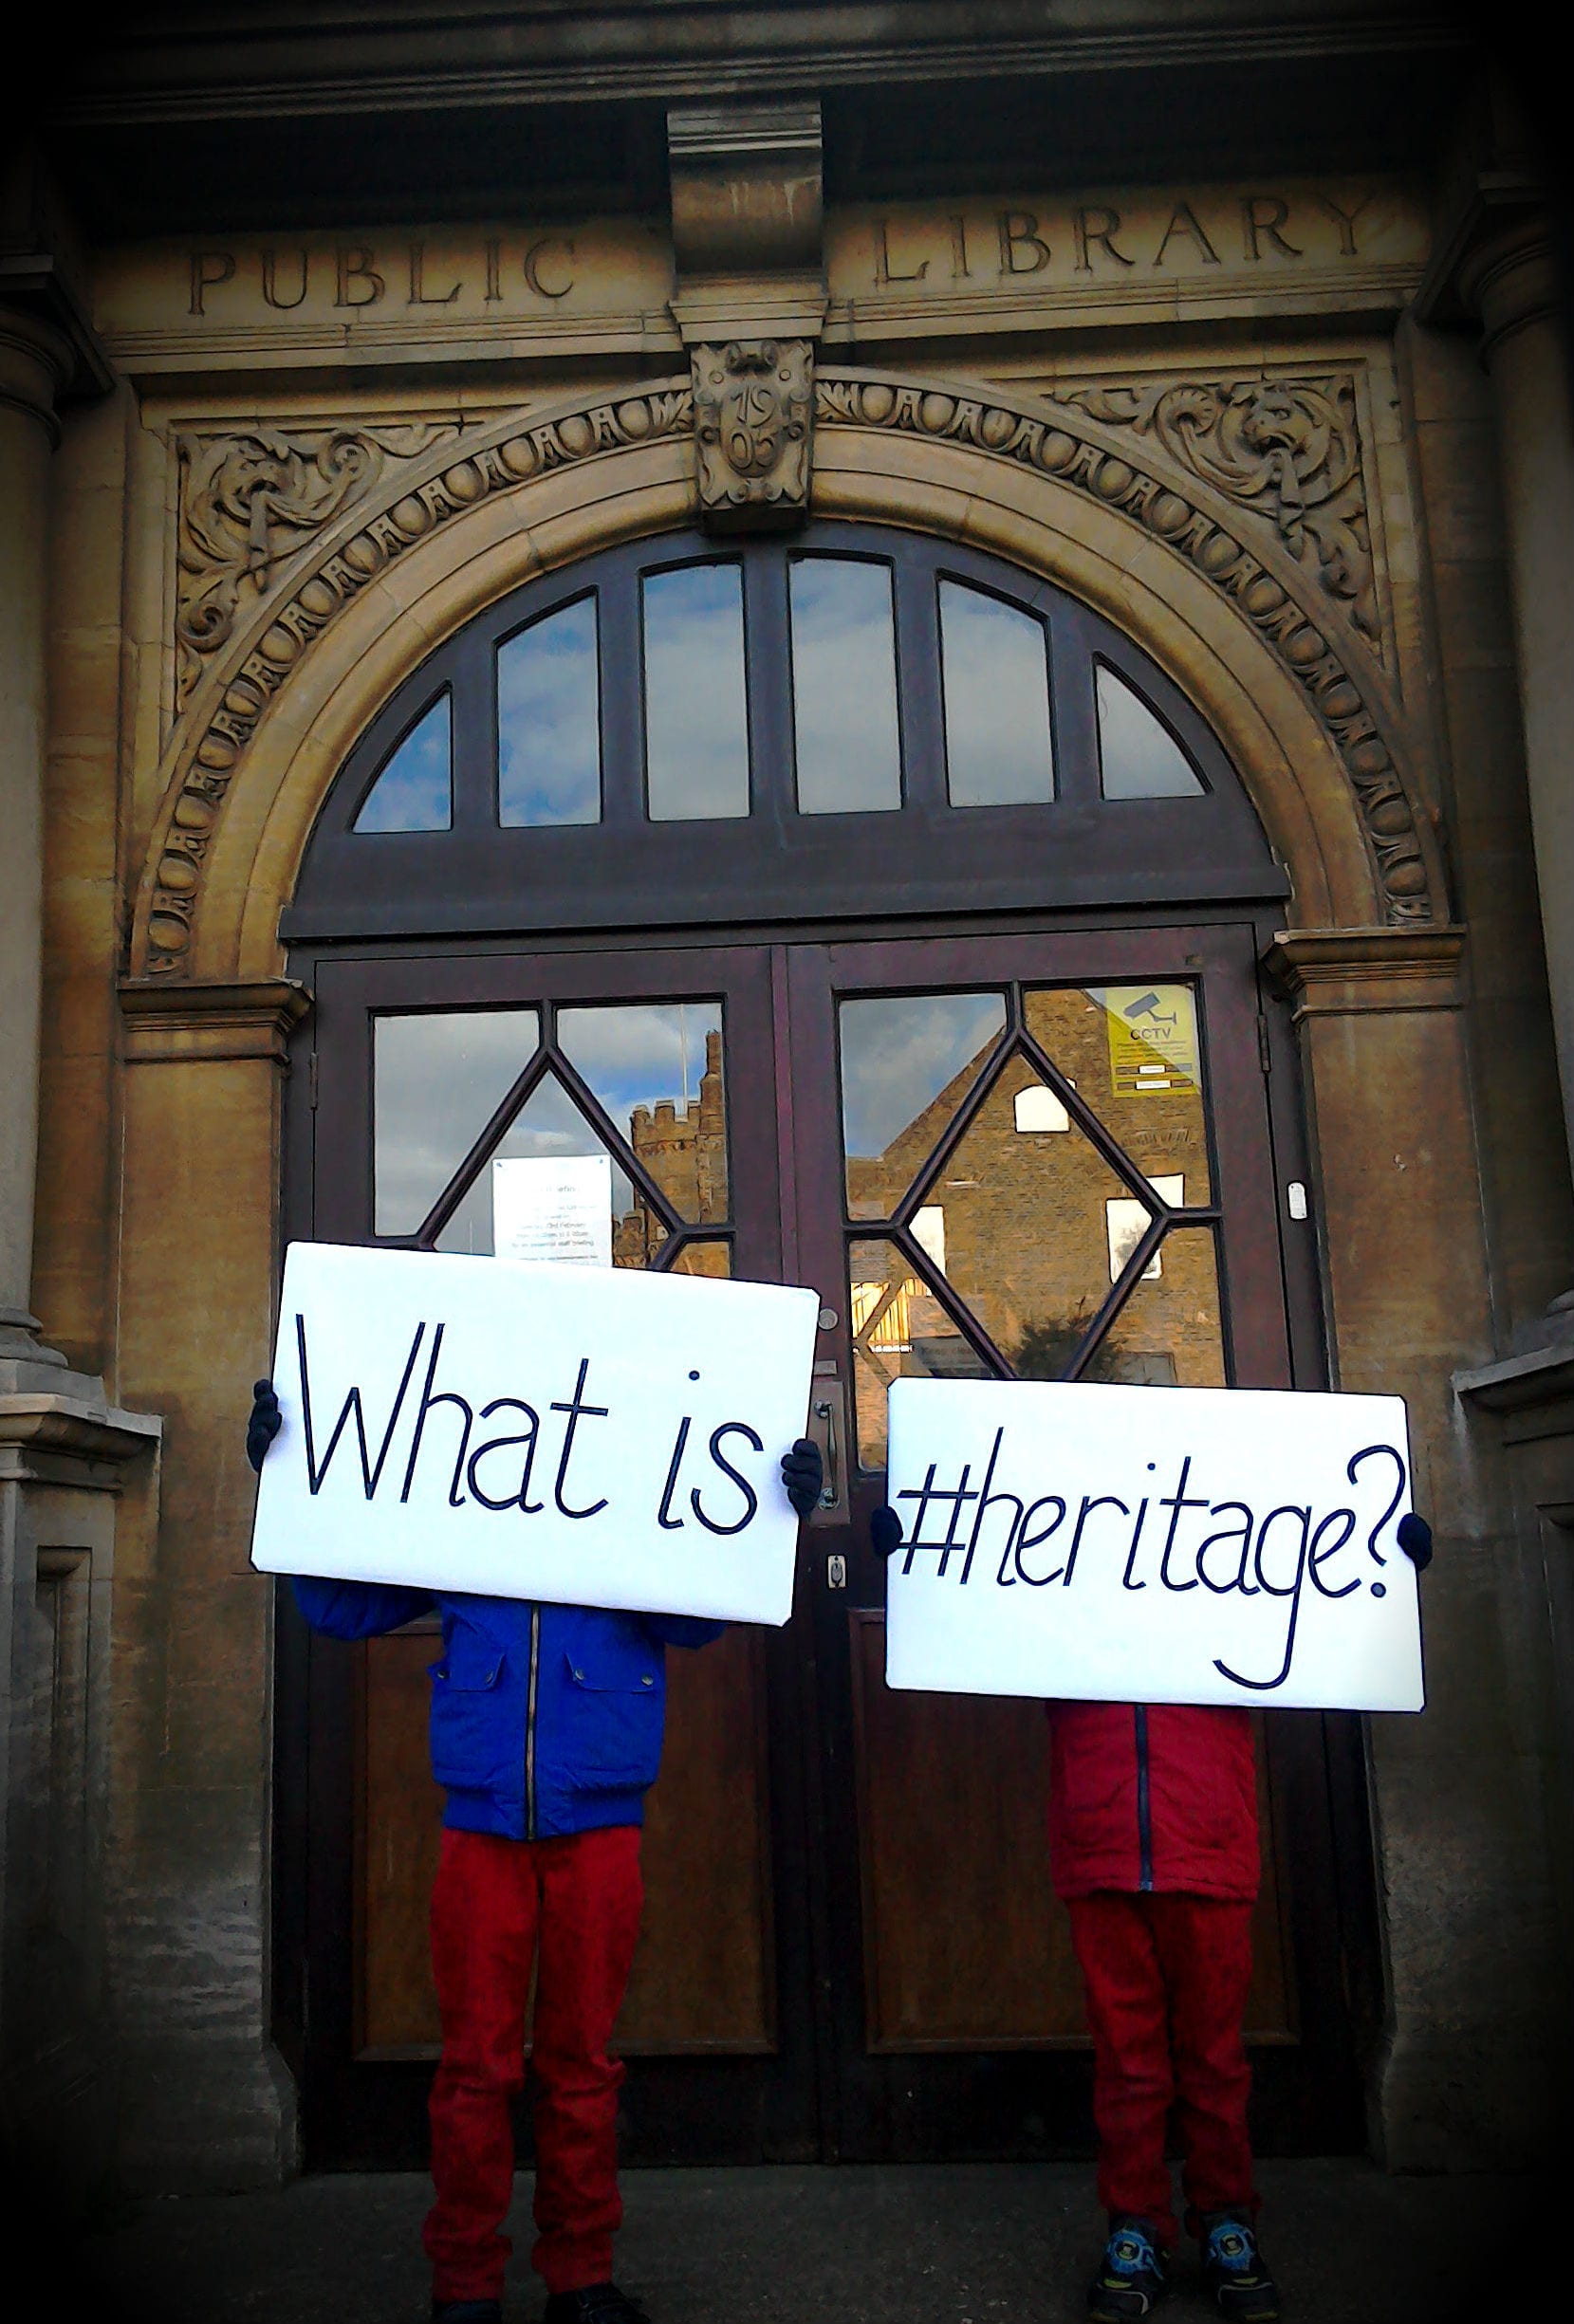 What is #heritage? The entrance to Gainsborough Public Library.